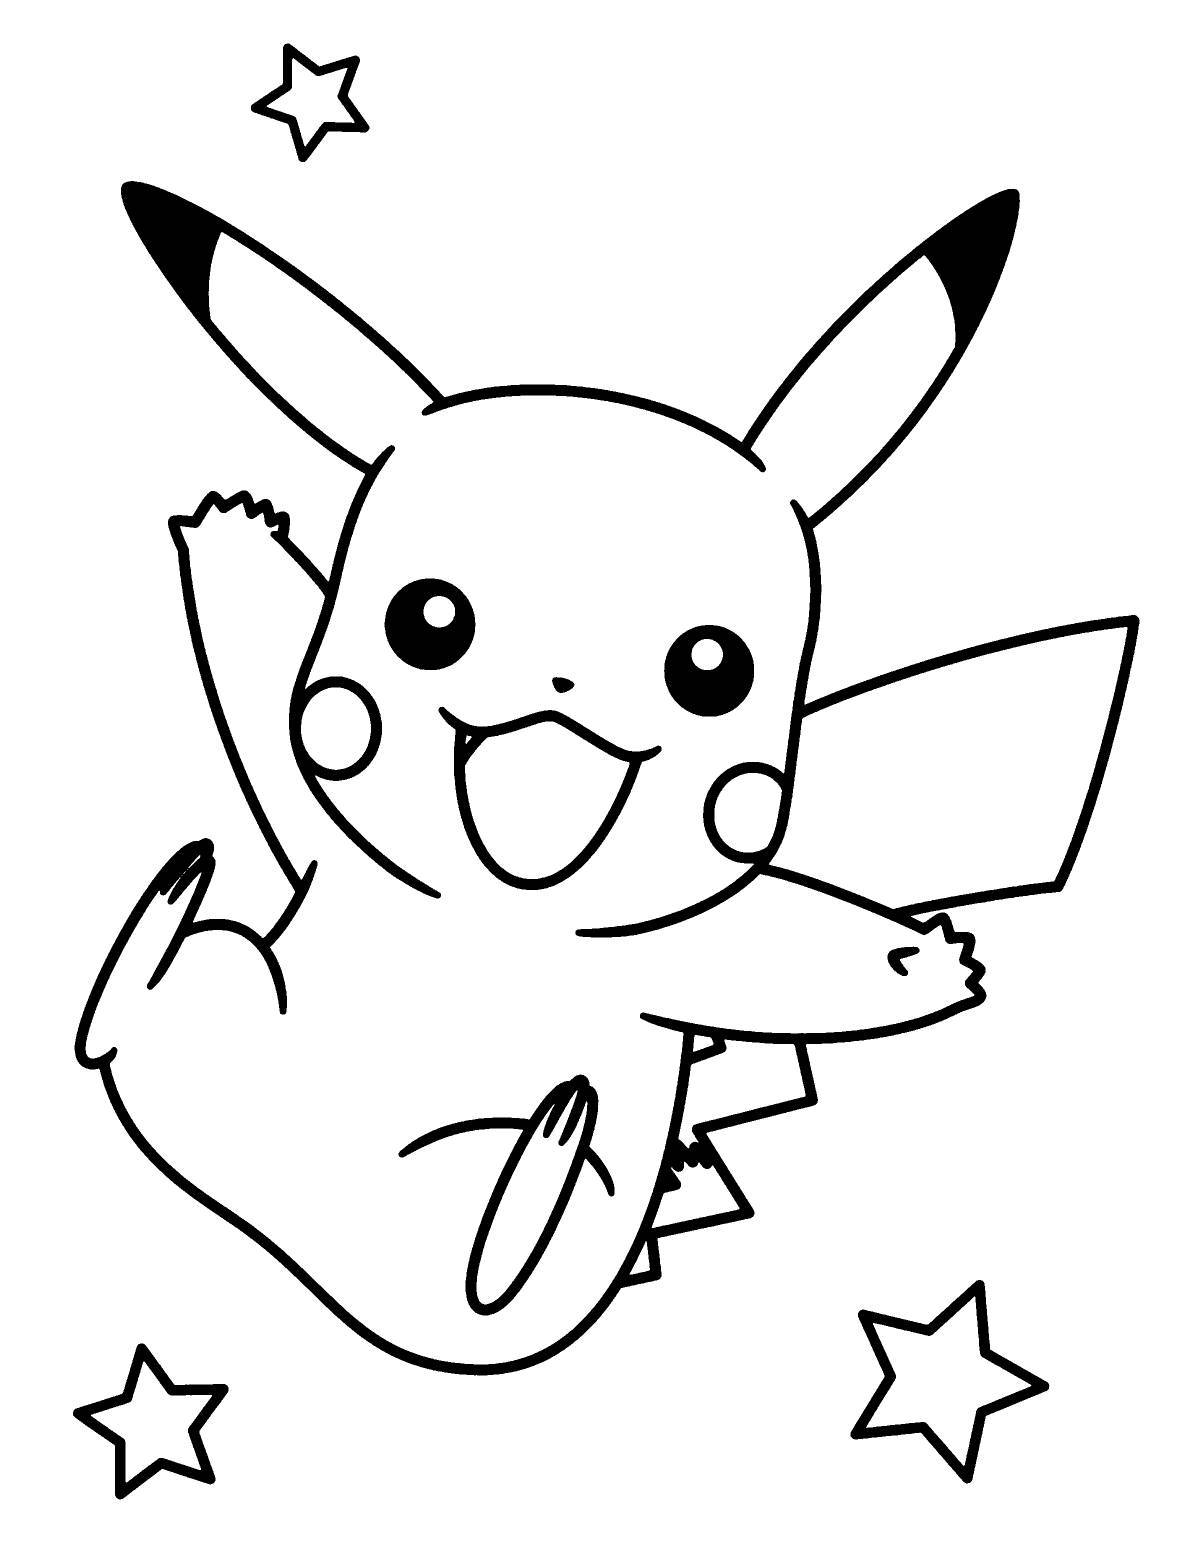 Pikachu live coloring for kids